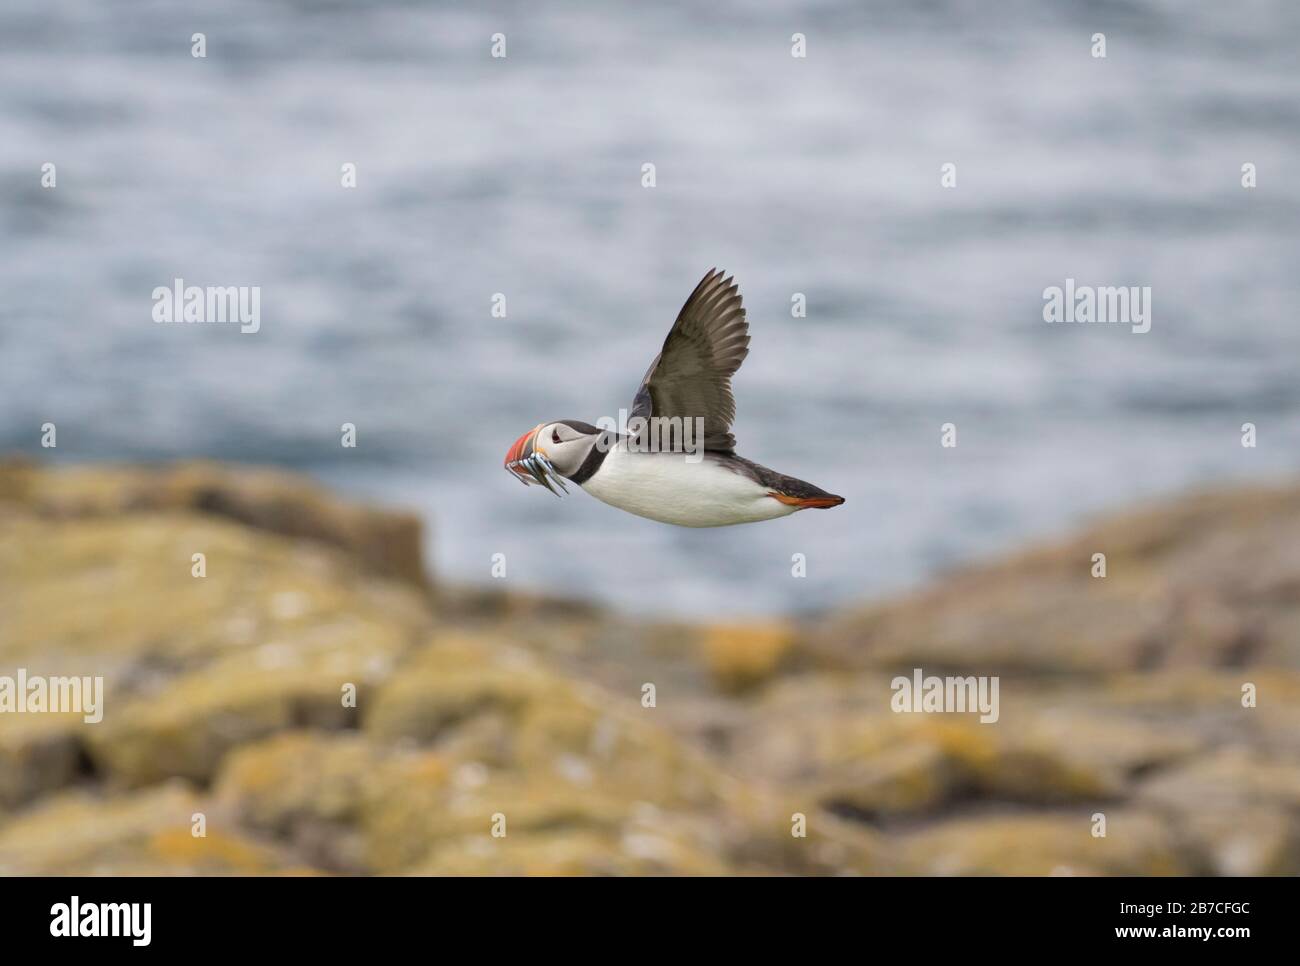 Puffin flying with fish in bill, Farne Islands, Northumberland, England, UK Stock Photo